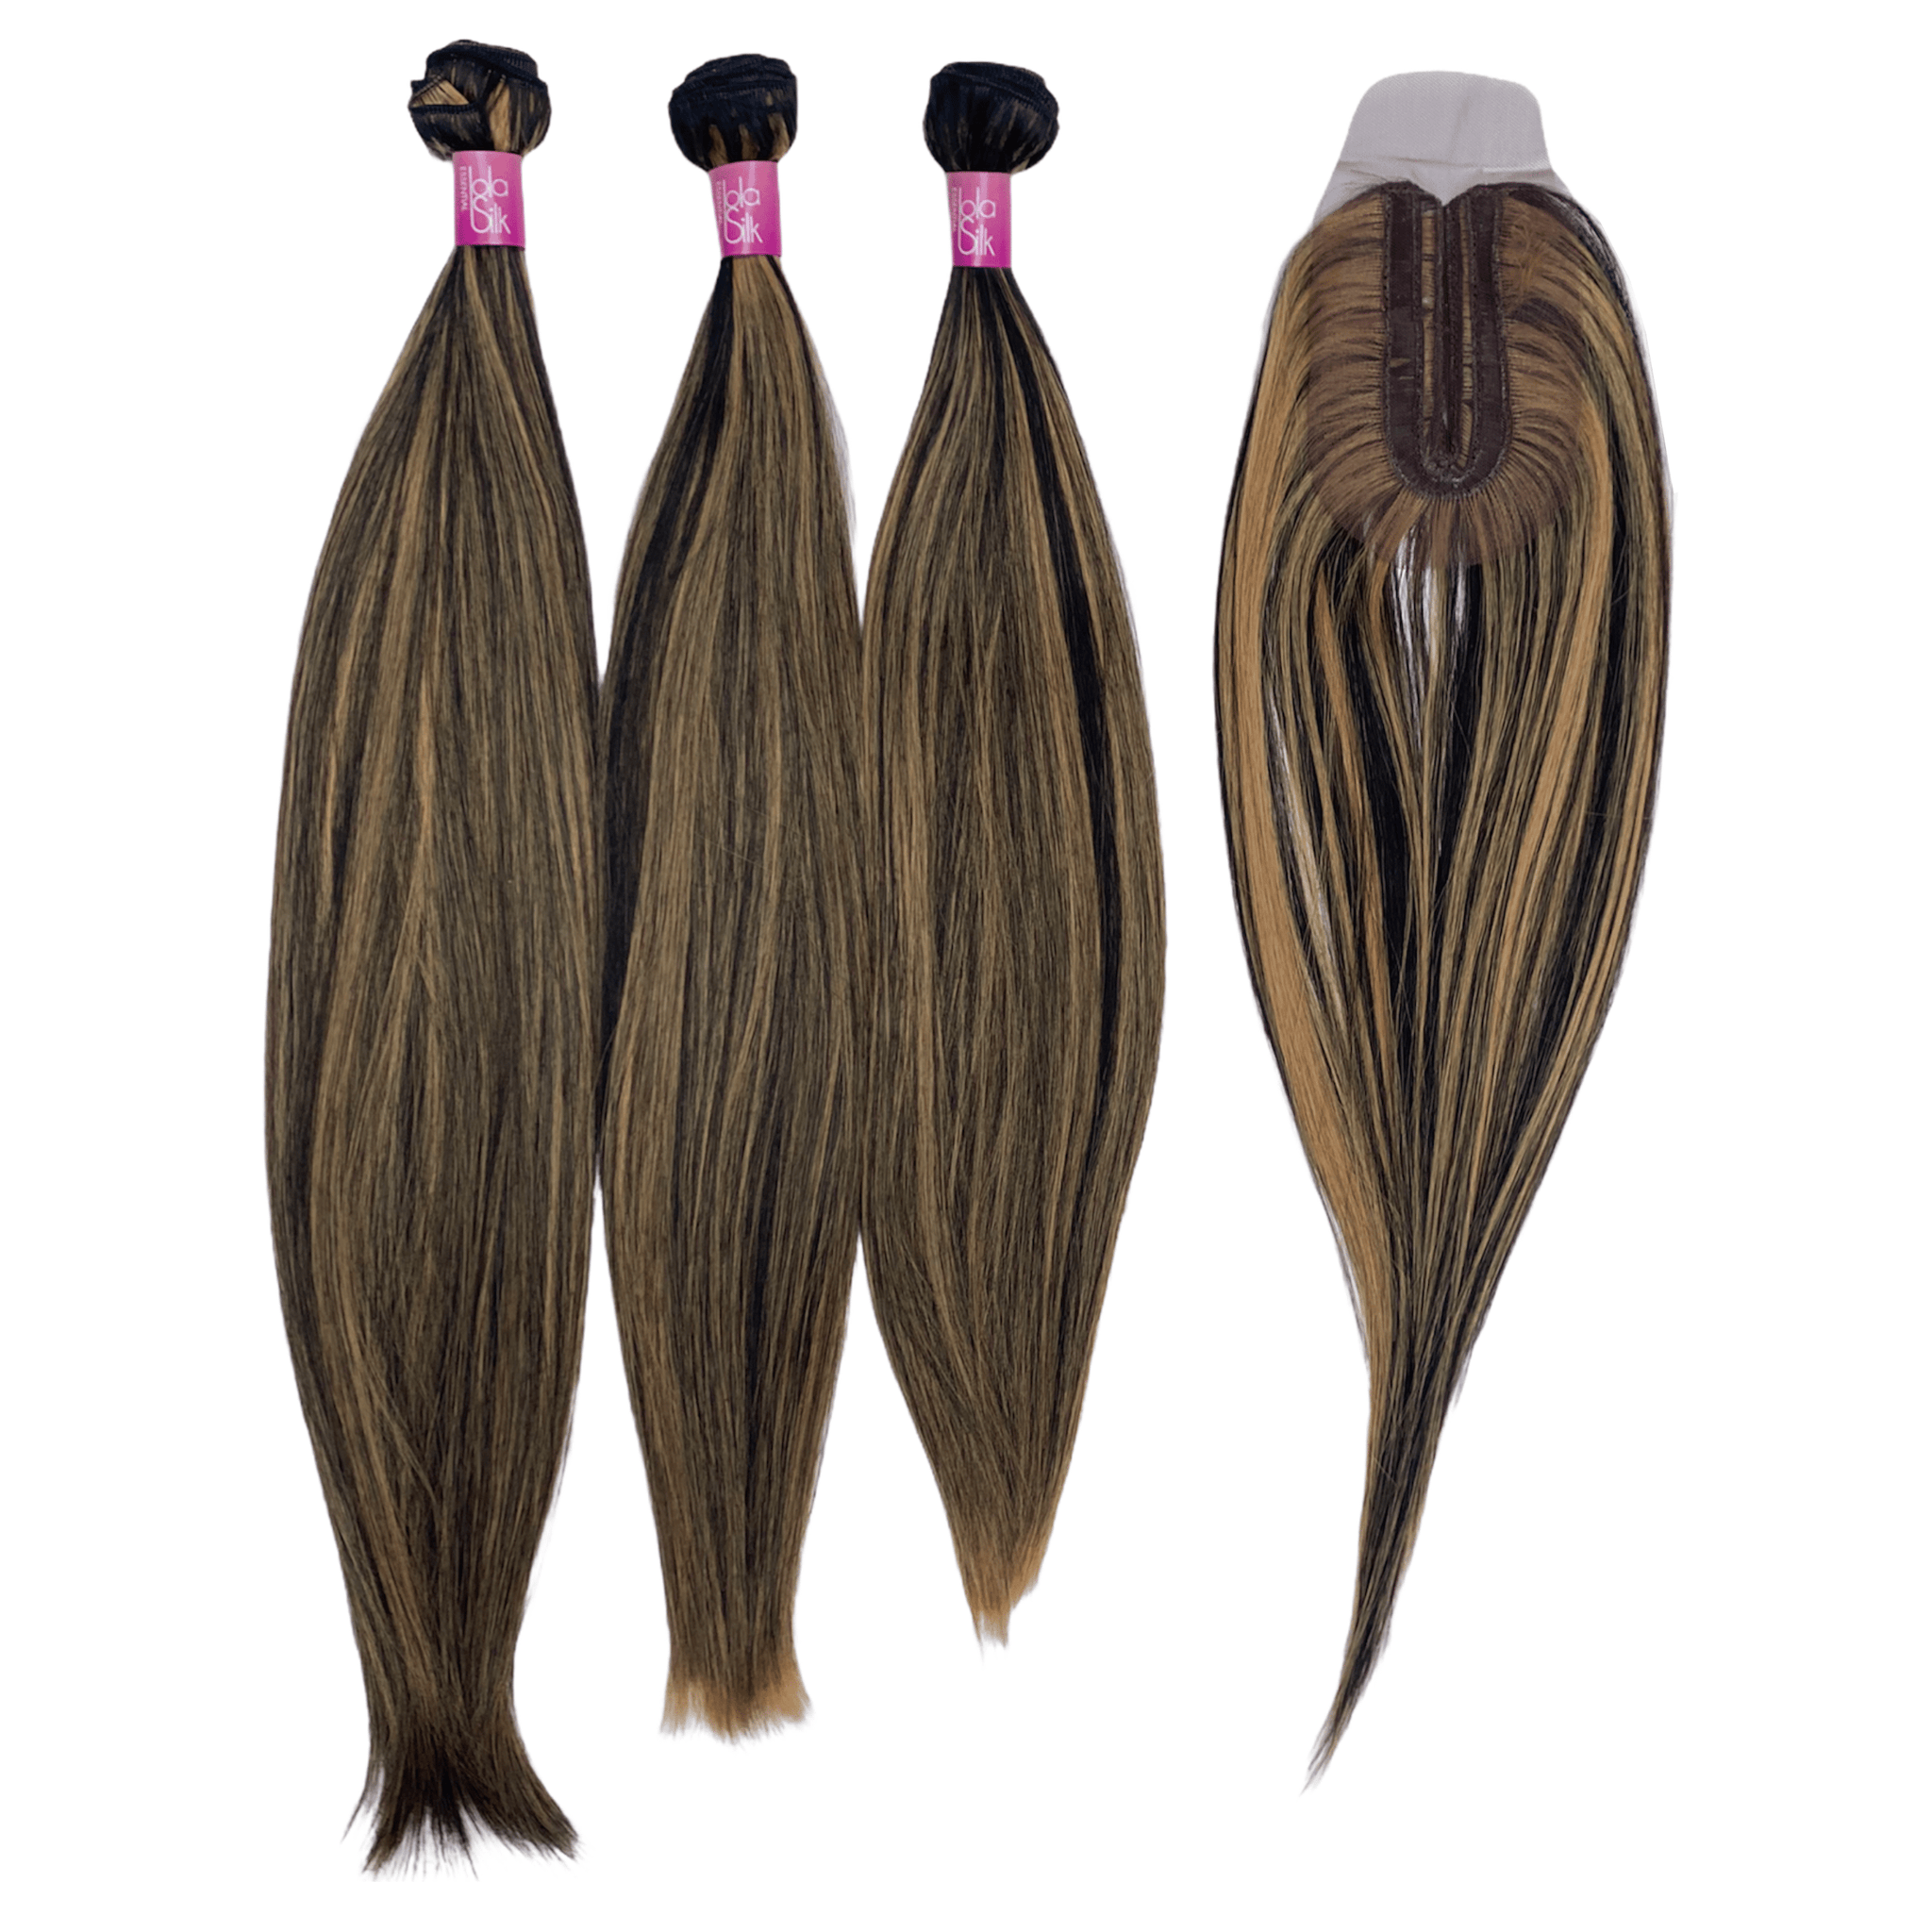 Synthetic Straight Weaves - 3 Bundles 22” 20” 18” & Closure - Highlights